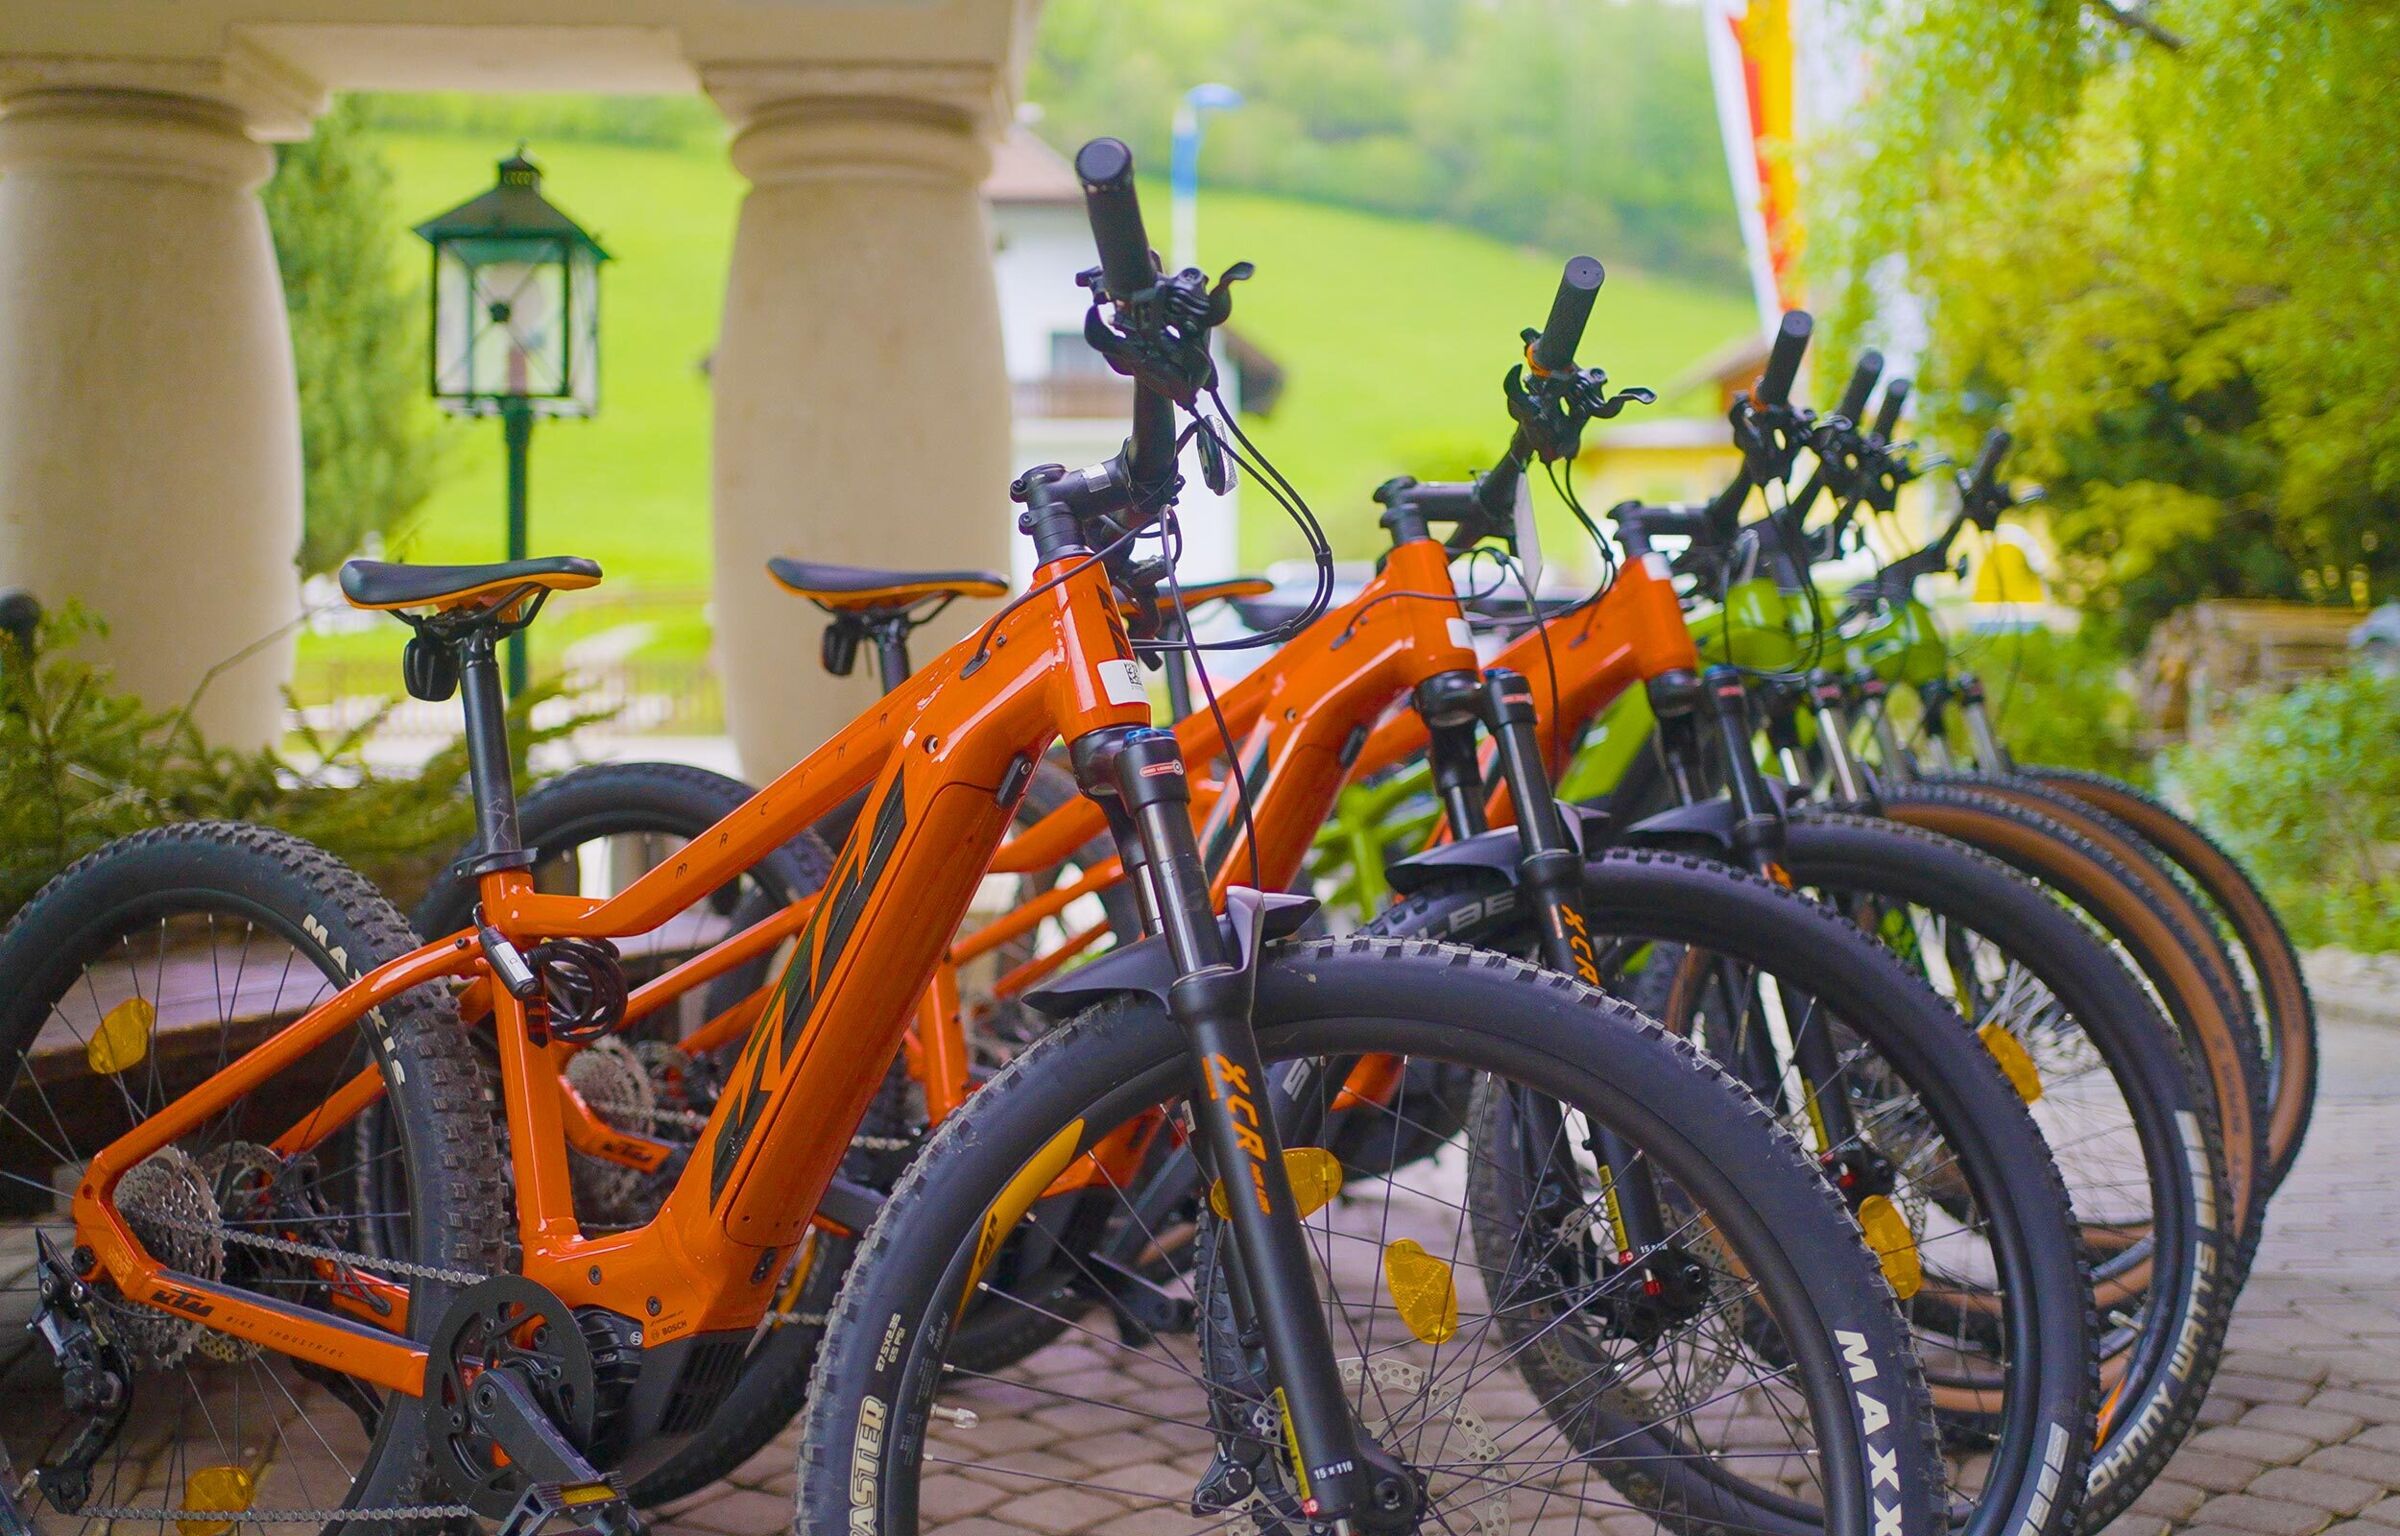 Some orange e-mountain bikes are available for rent at the Trattlerhof.